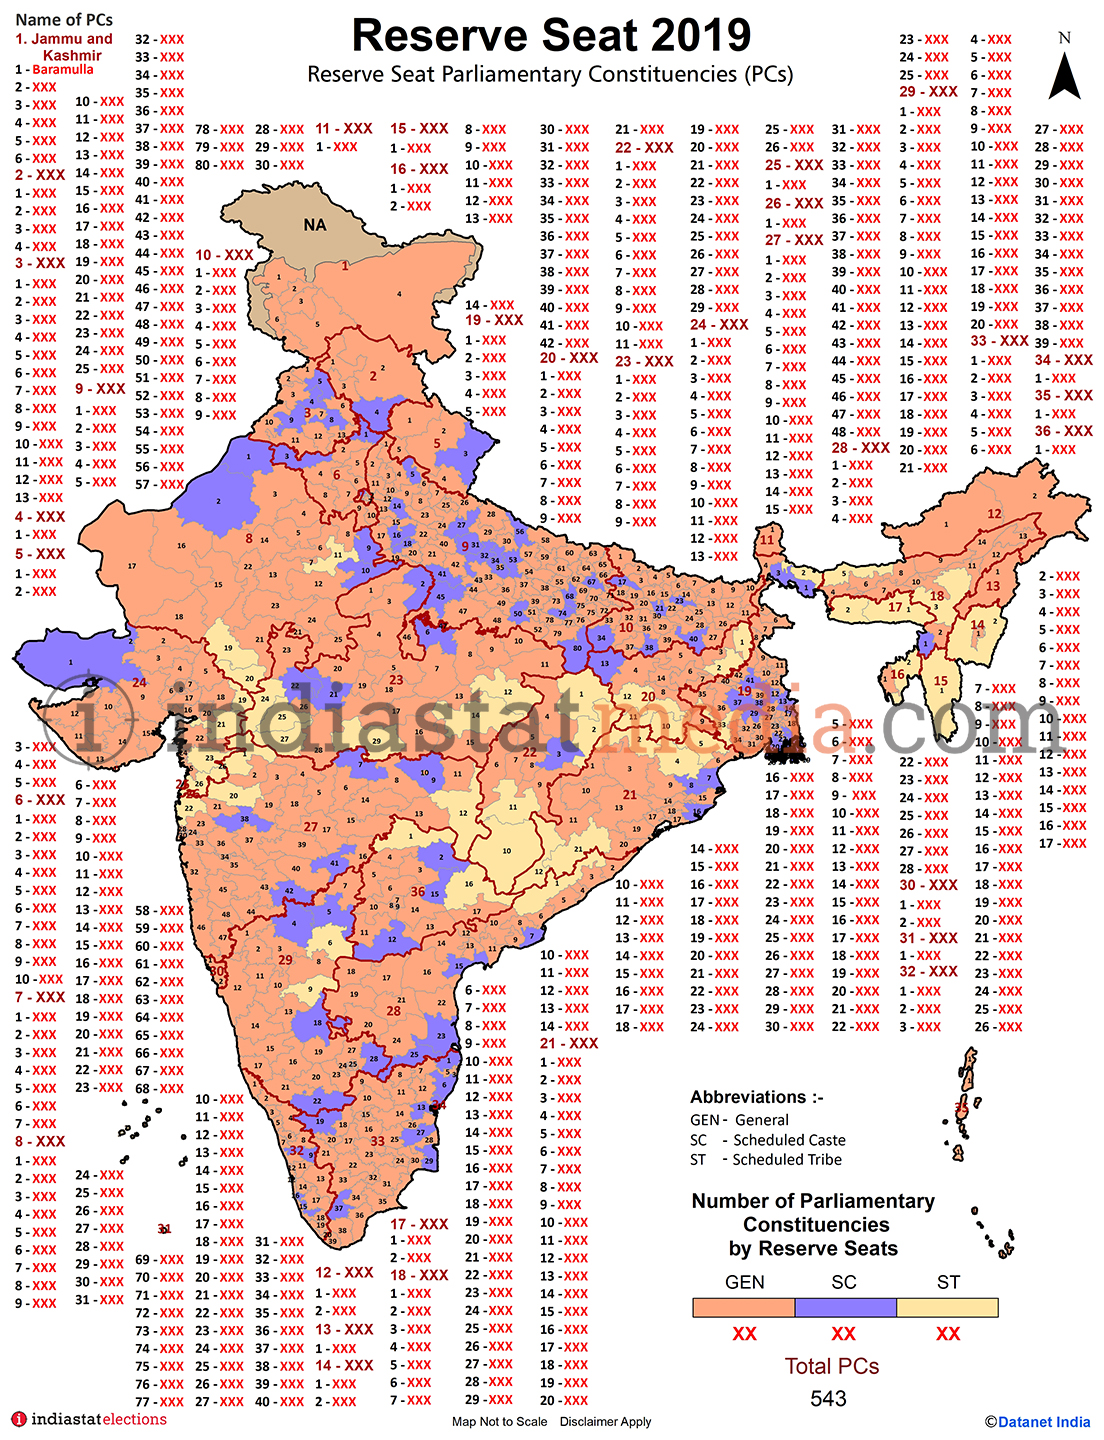 Reserve Seats by Parliamentary Constancies in India (Parliamentary Election - 2019)